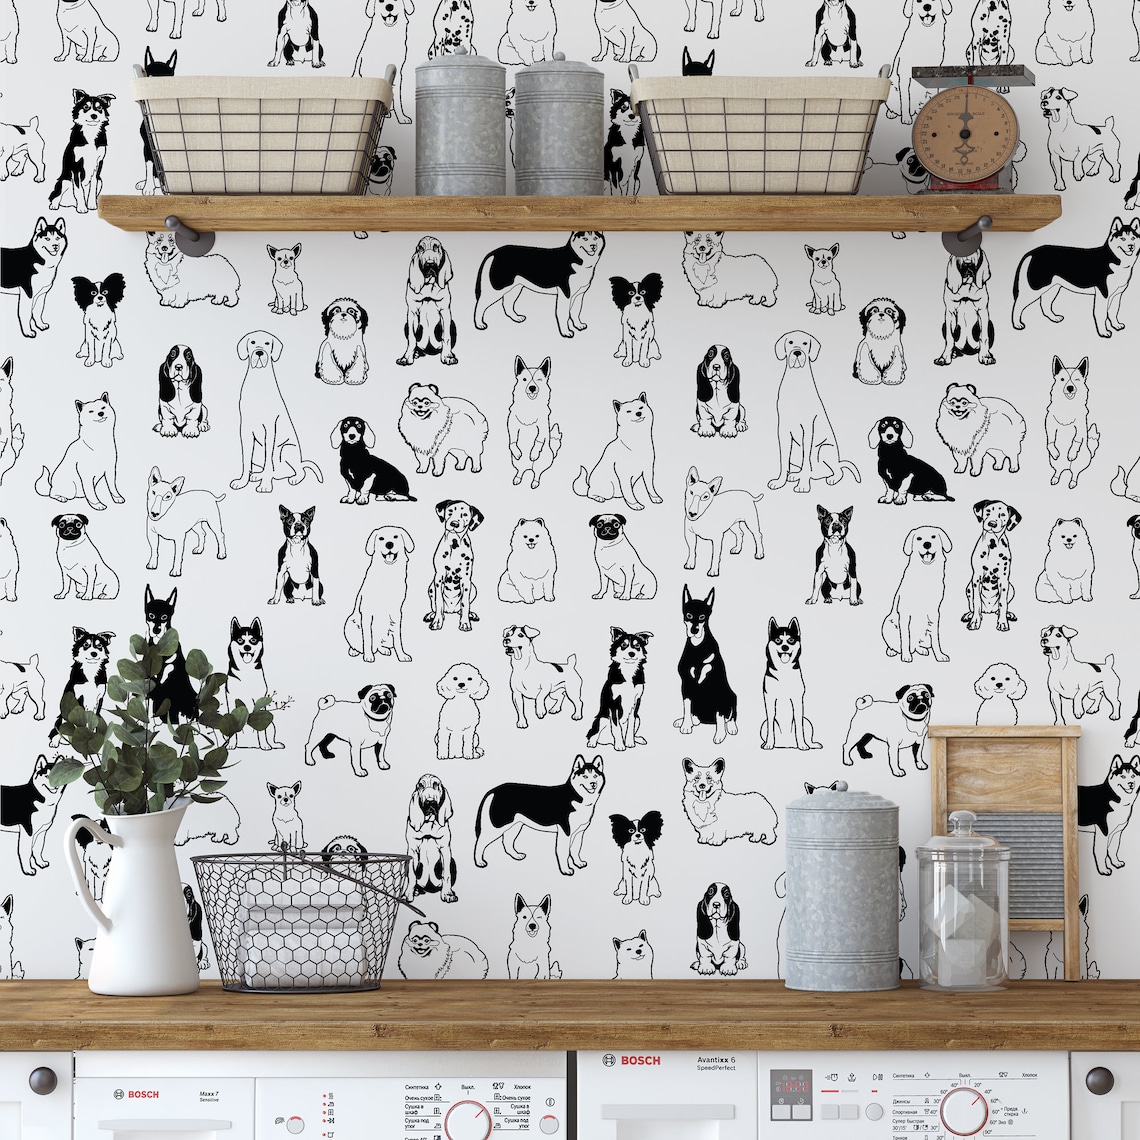 Dogs wallpaper peel stick temporary adhesive black and white | Etsy